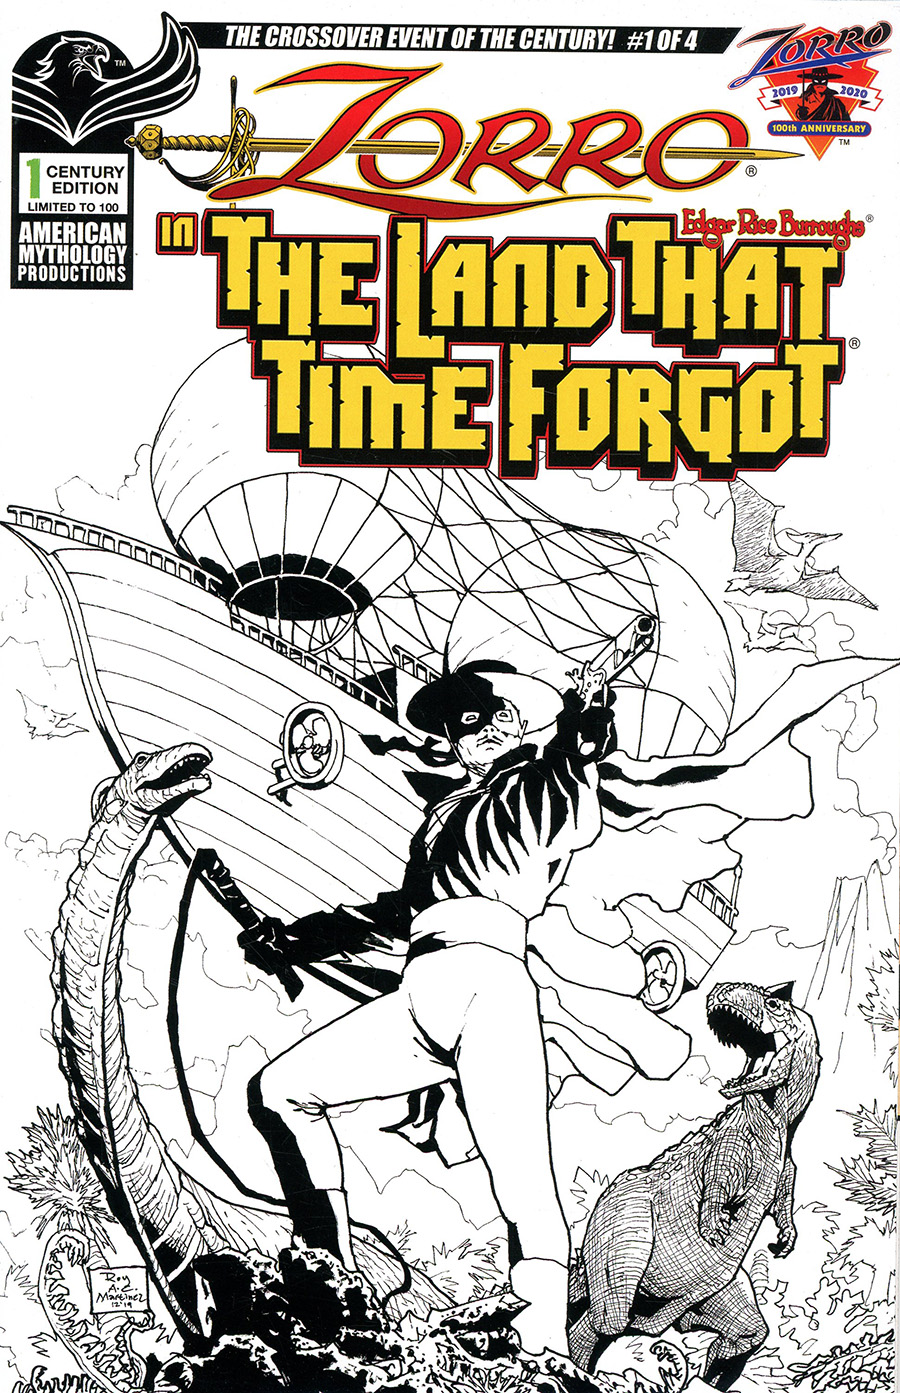 Zorro In The Land That Time Forgot #1 Cover D Limited Edition Roy Allan Martinez Black & White Cover